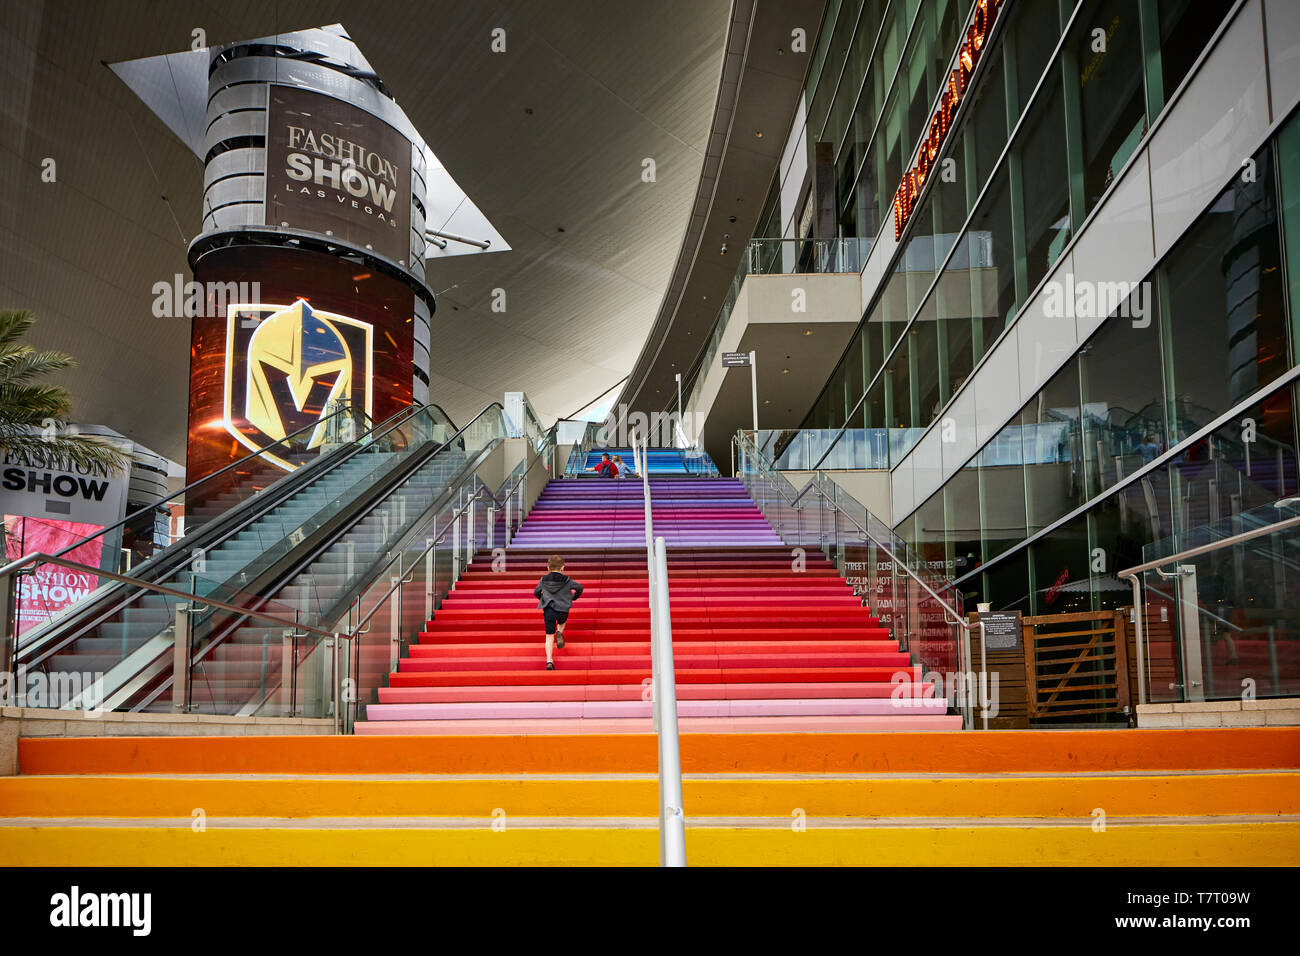 Las Vegas, Paradise, Nevada USA, Fashion Show mall Art on Plaza Stairs: “COLORS THAT SPEAK TO A UNITED CITY” at The Plaza by Tanya Michelle Watler Stock Photo